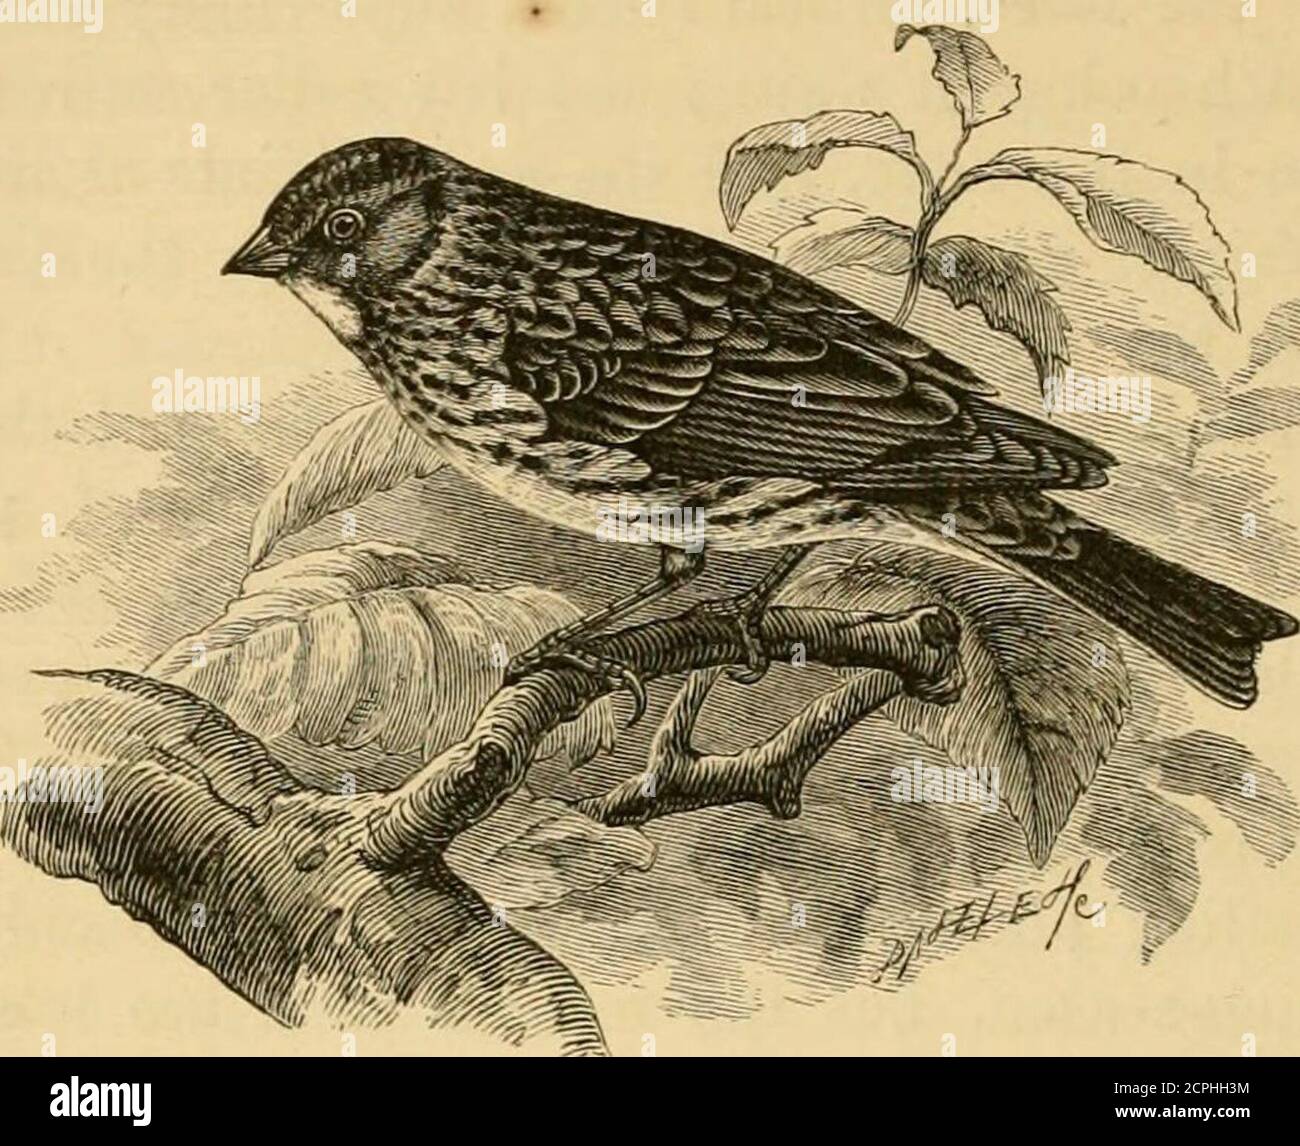 . A history of British birds . VOL. ir. 34 PASSE RES. EMBERIZID.E. EMBERIZID^E.. Emberiza pusilla, Pallas*.THE LITTLE BUNTING. At a meeting of the Zoological Society of London onNovember 8tli, 1864, Mr. Gould exhibited a specimen ofthis species, previously unknown to Britain, which he saidhad been lately taken in a clap-net near Brighton (Proc.Zool. Soc. 1864, p. 377). Soon afterwards Mr. Rowleyfurnished (Ibis, 1865, p. 113) some additional particularsof its capture, which took place on the 2nd of the monthnamed, and, from his examination of the living bird, notonly identified the species to w Stock Photo